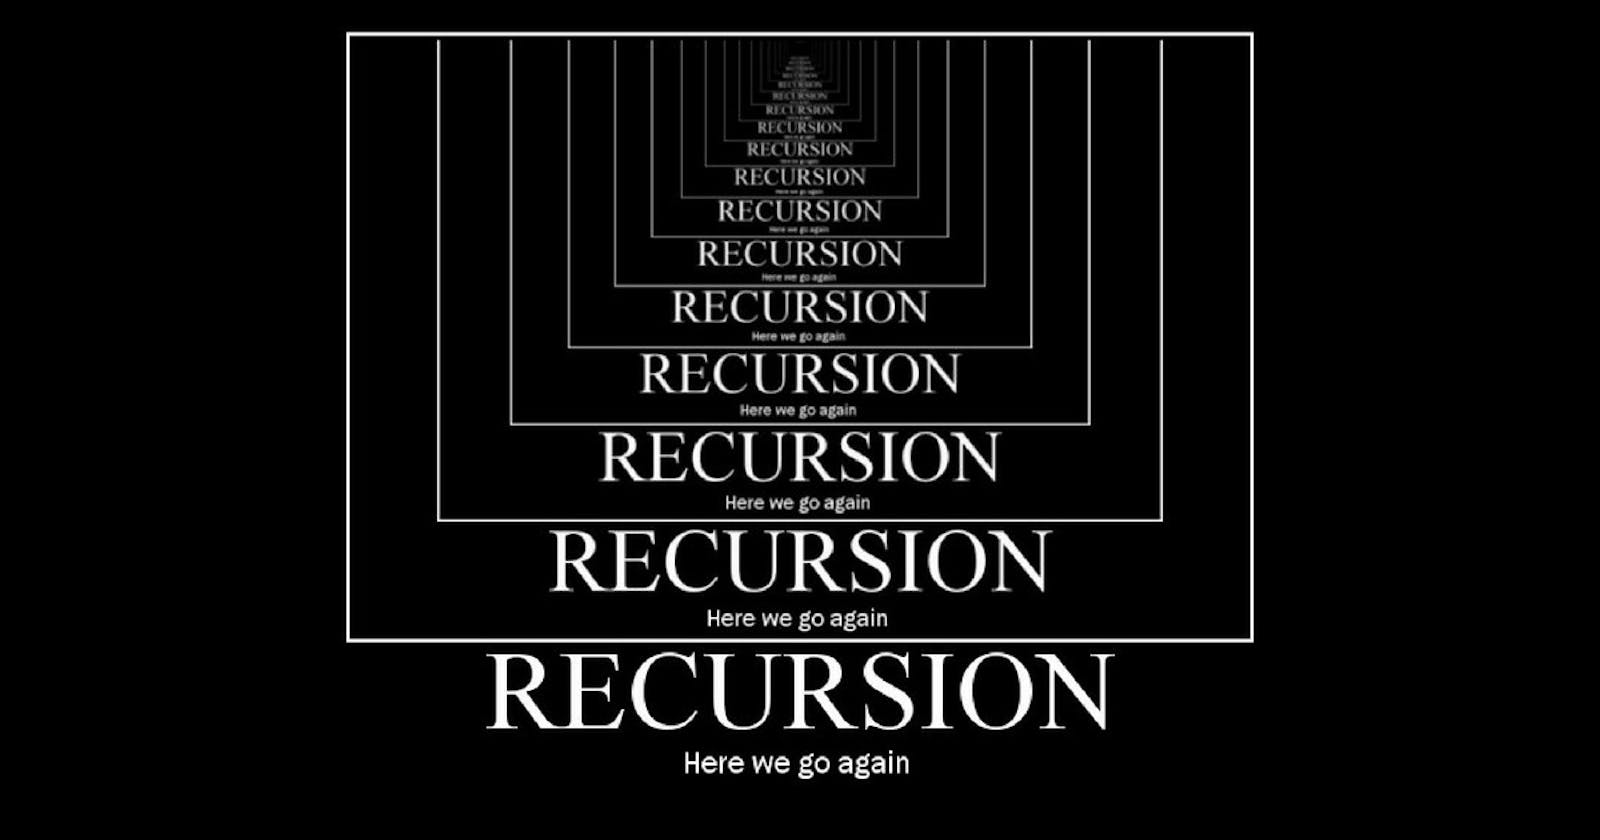 Recursion 101 - The Intuition